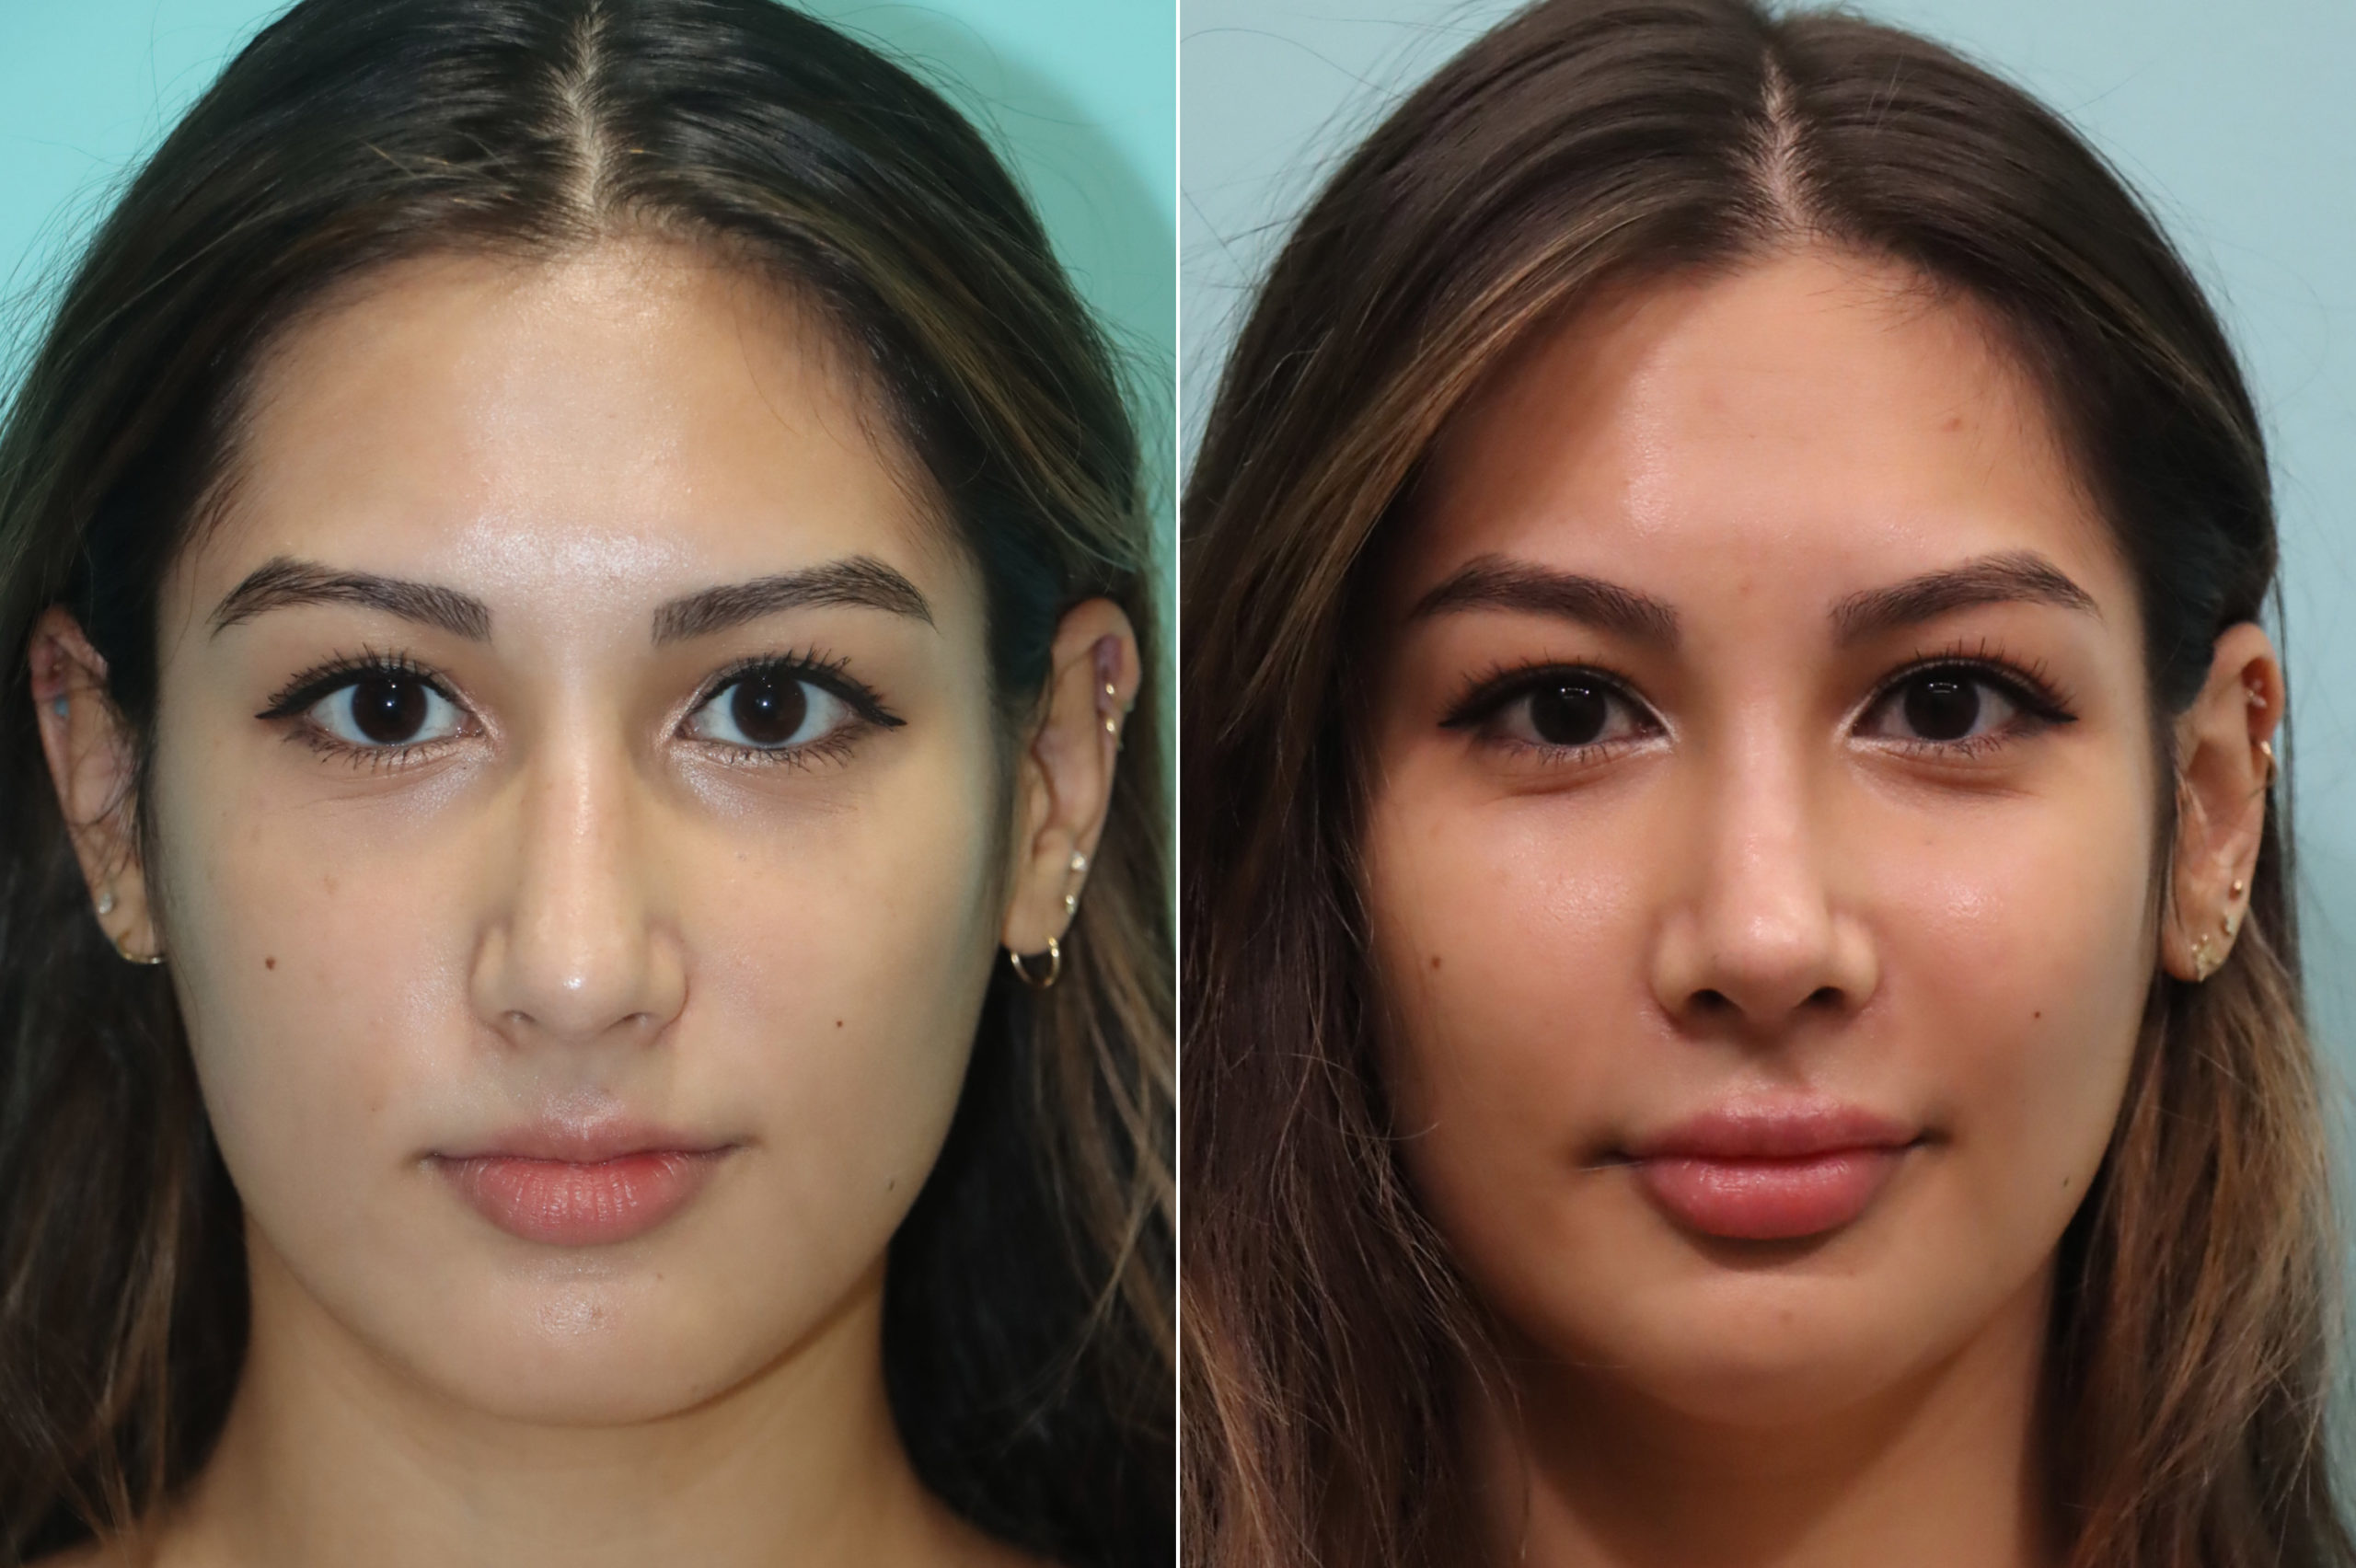 Dr. Naderi Ethnic Rhinoplasty Reviews, Cost, Before and After